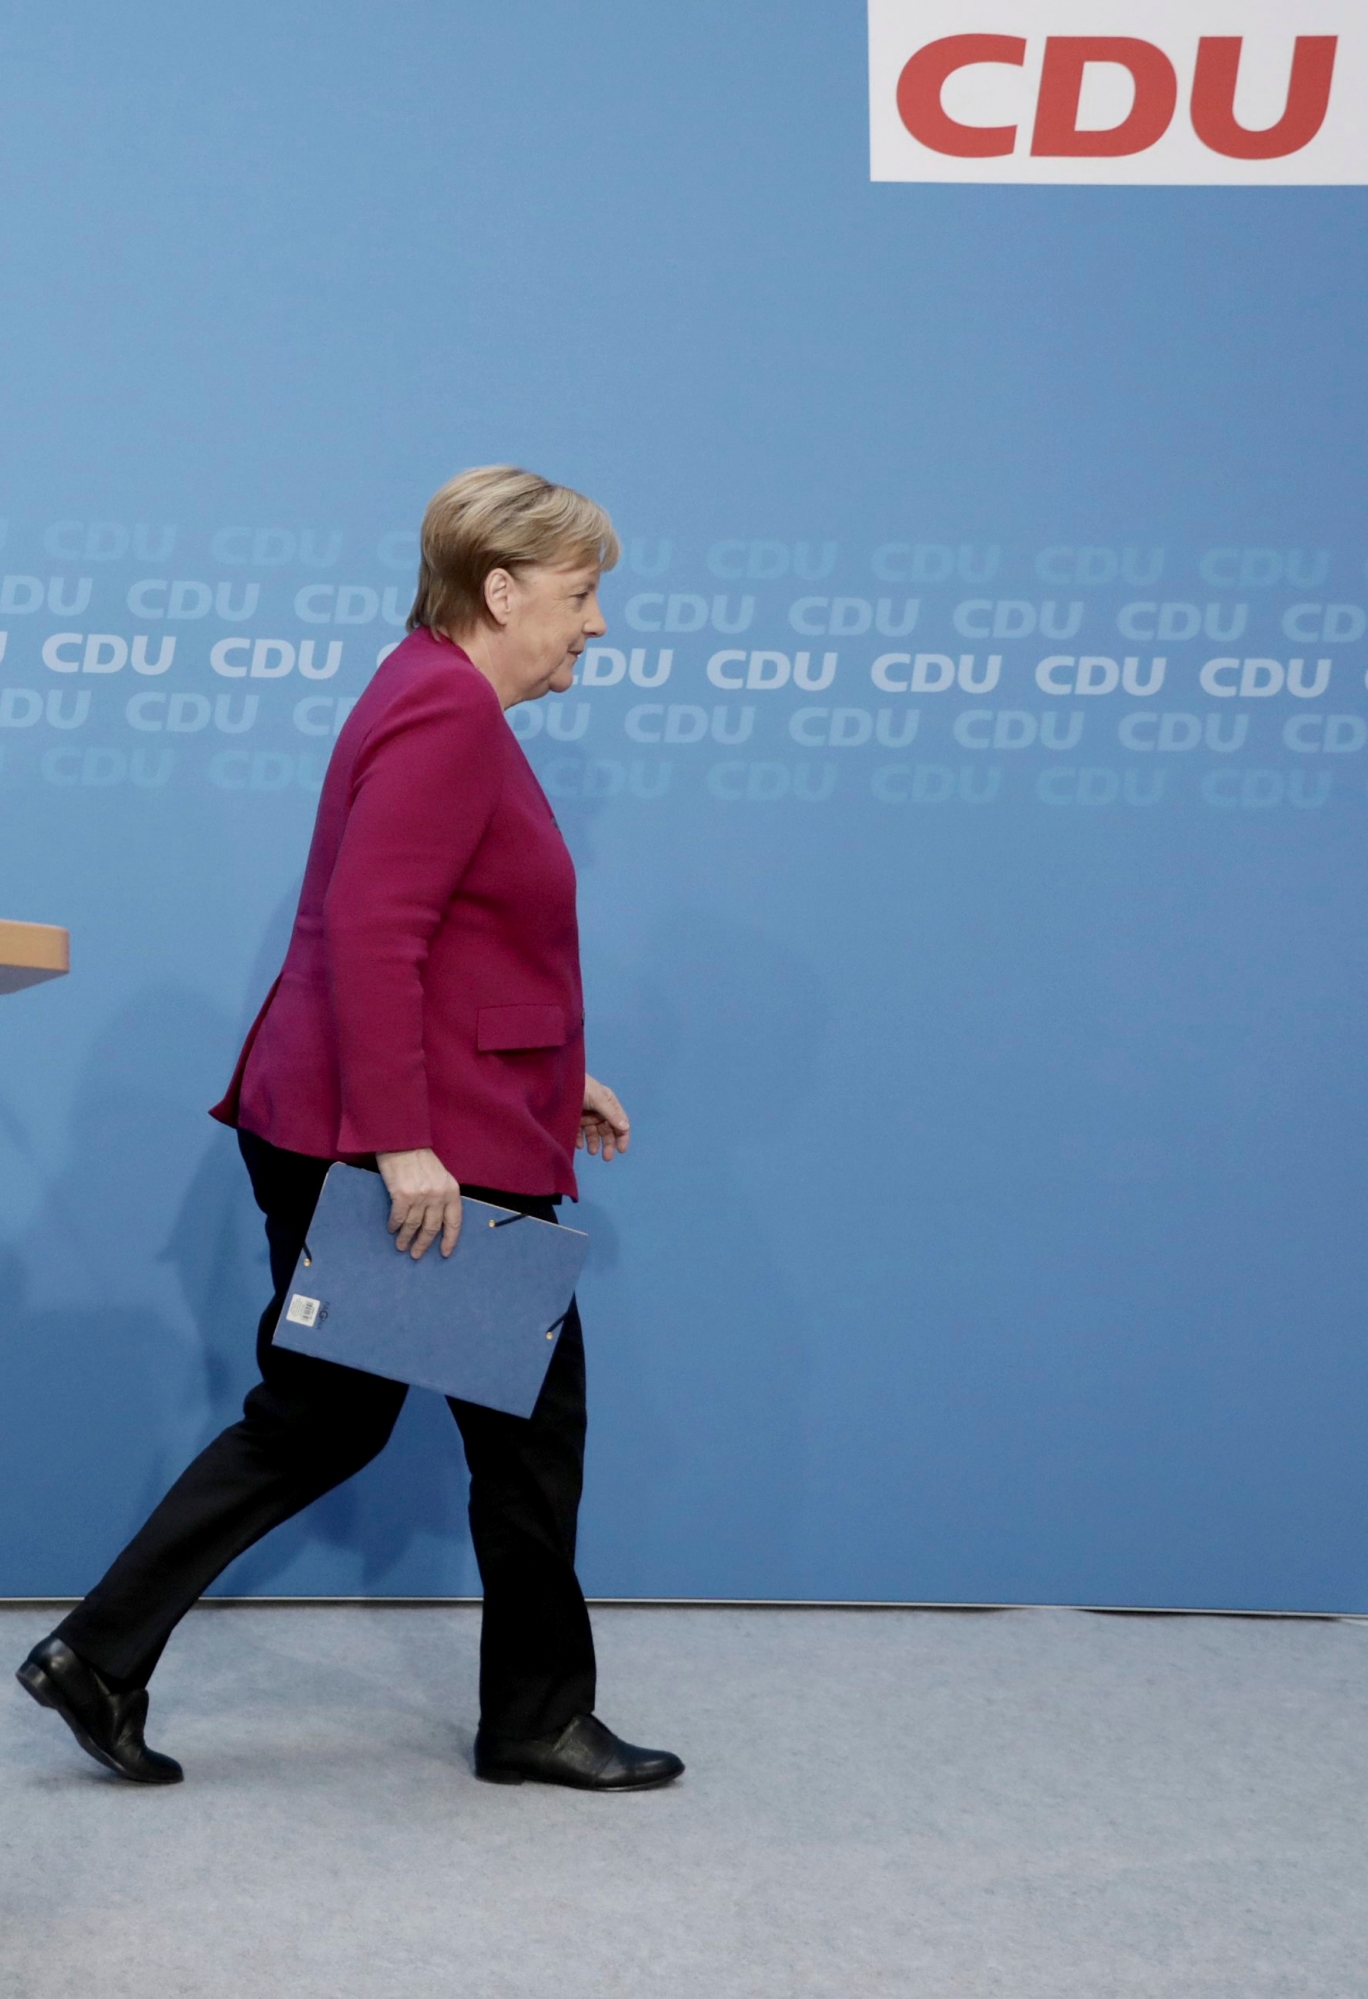 German Christian Democratic Party, CDU, chairwoman and Chancellor Angela Merkel leaves the podium after a news conference following a party's leaders meeting at the headquarters the in Berlin, Germany, Monday, Oct. 29, 2018. (Kay Nietfeld/dpa via AP) Germany Election